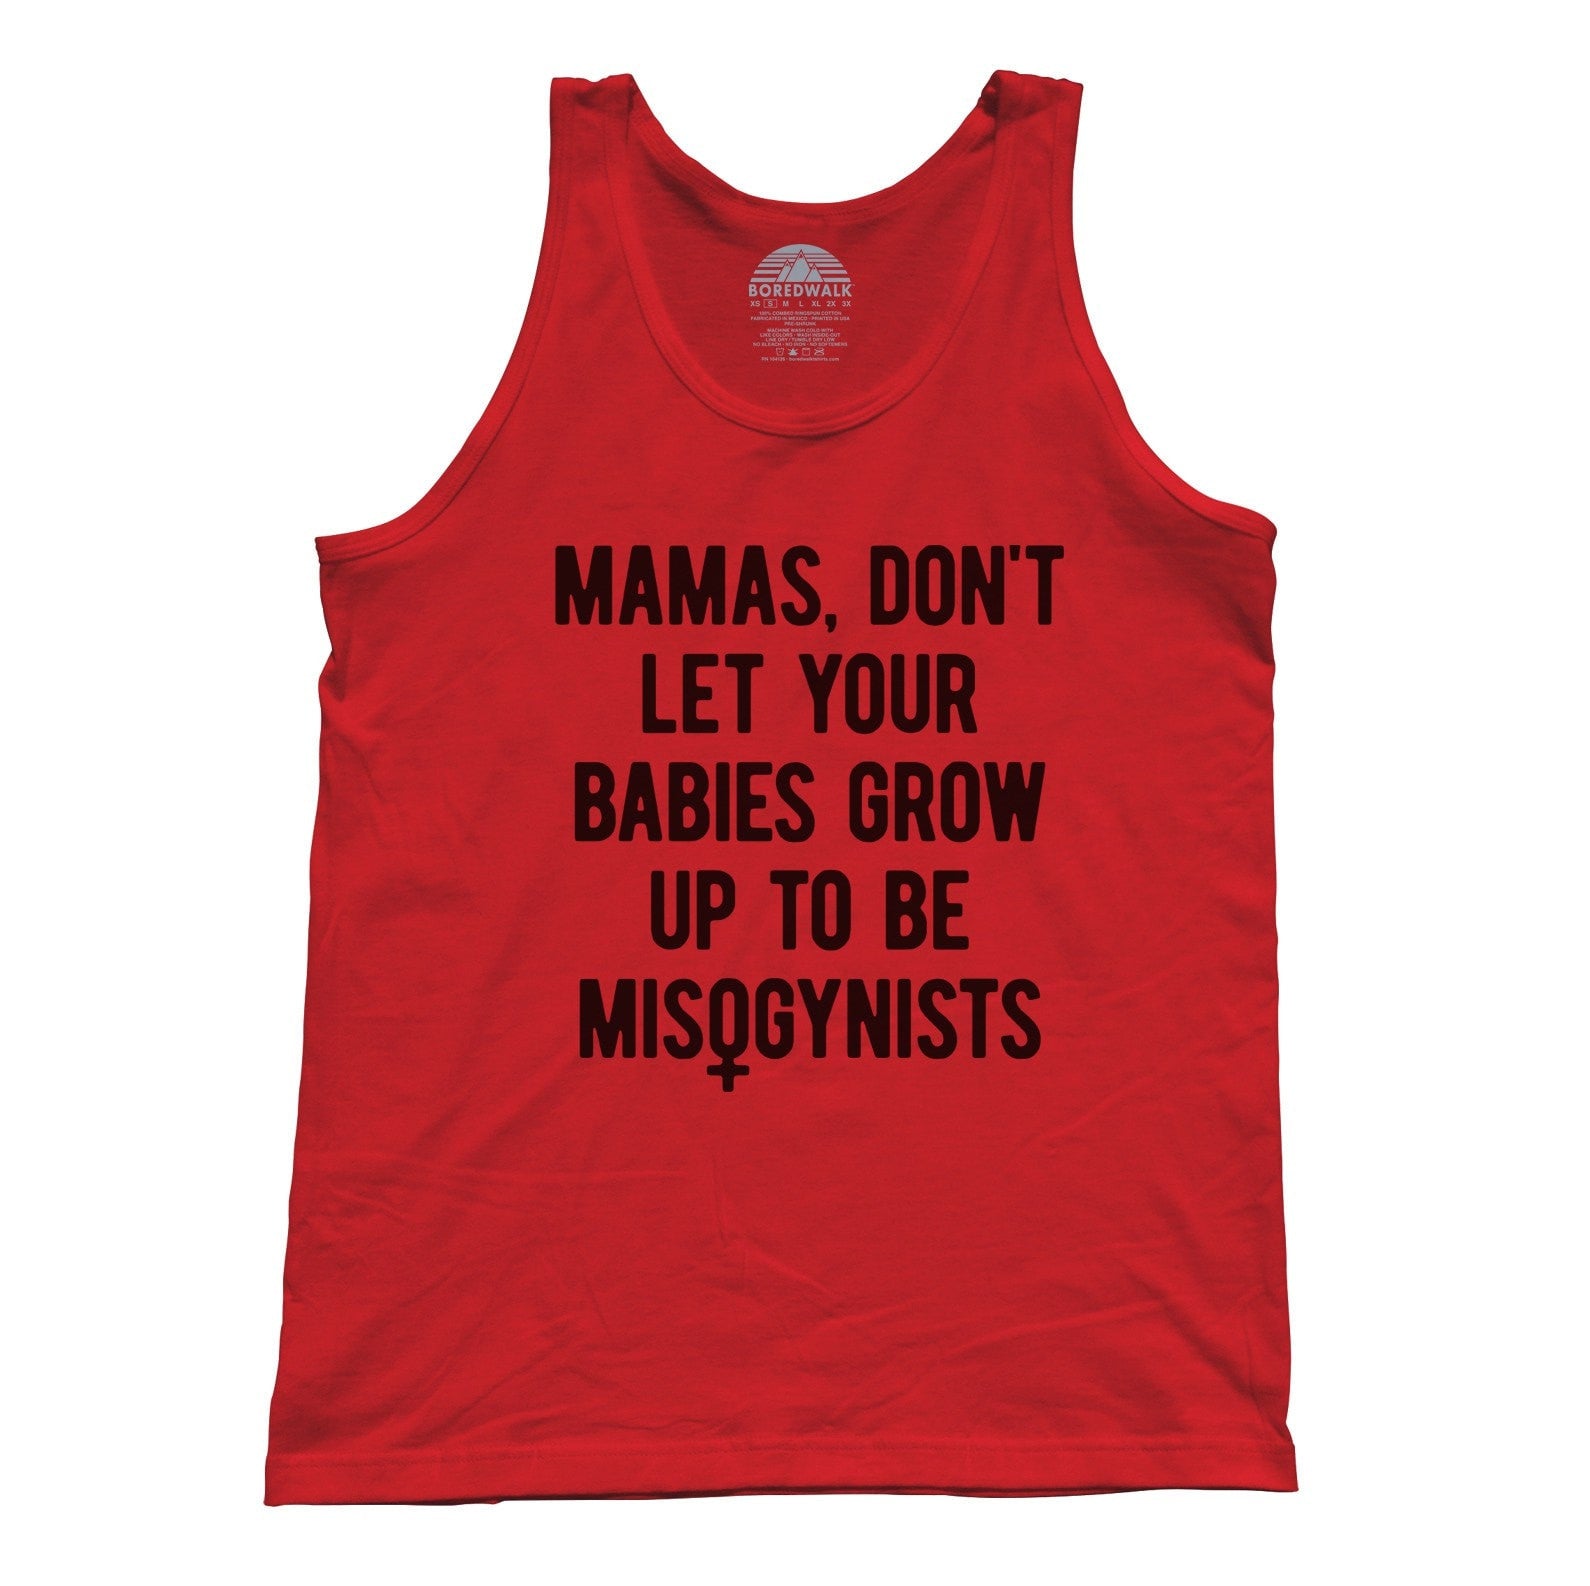 Unisex Mamas Don't Let Your Babies Grow Up to be Misogynists Tank Top